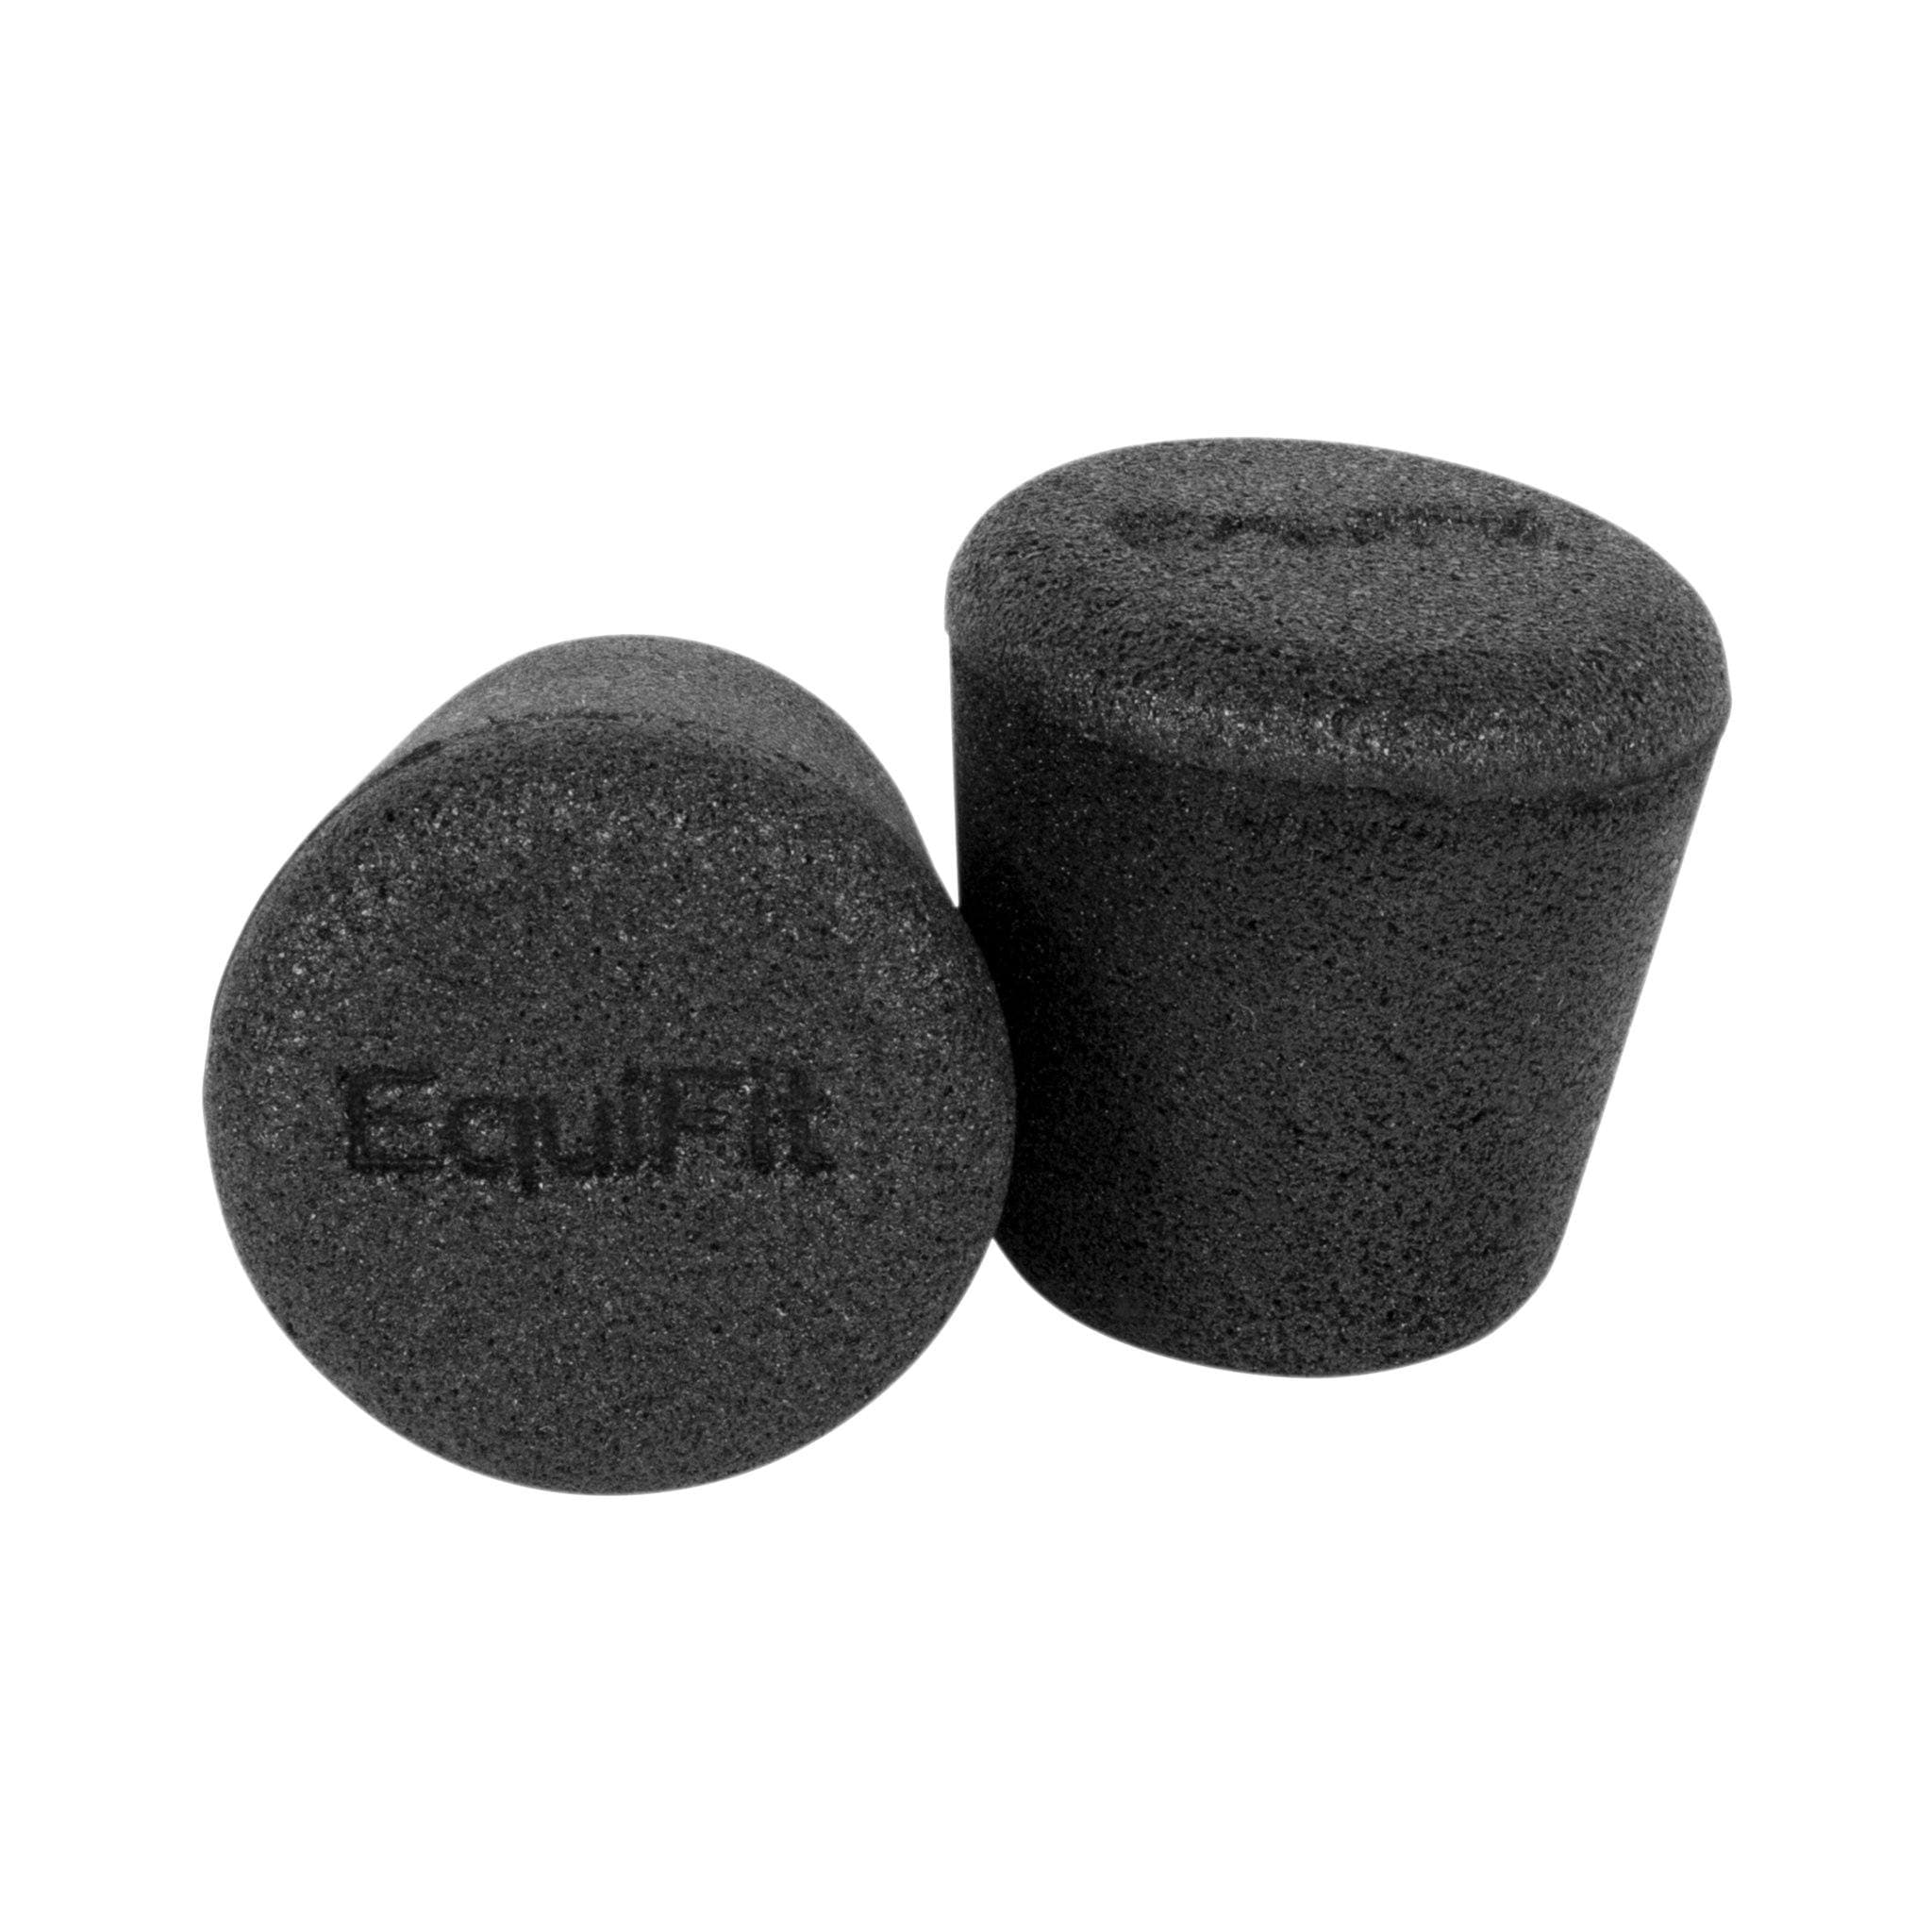 EquiFit SilentFit Ear Plugs 4 Pairs